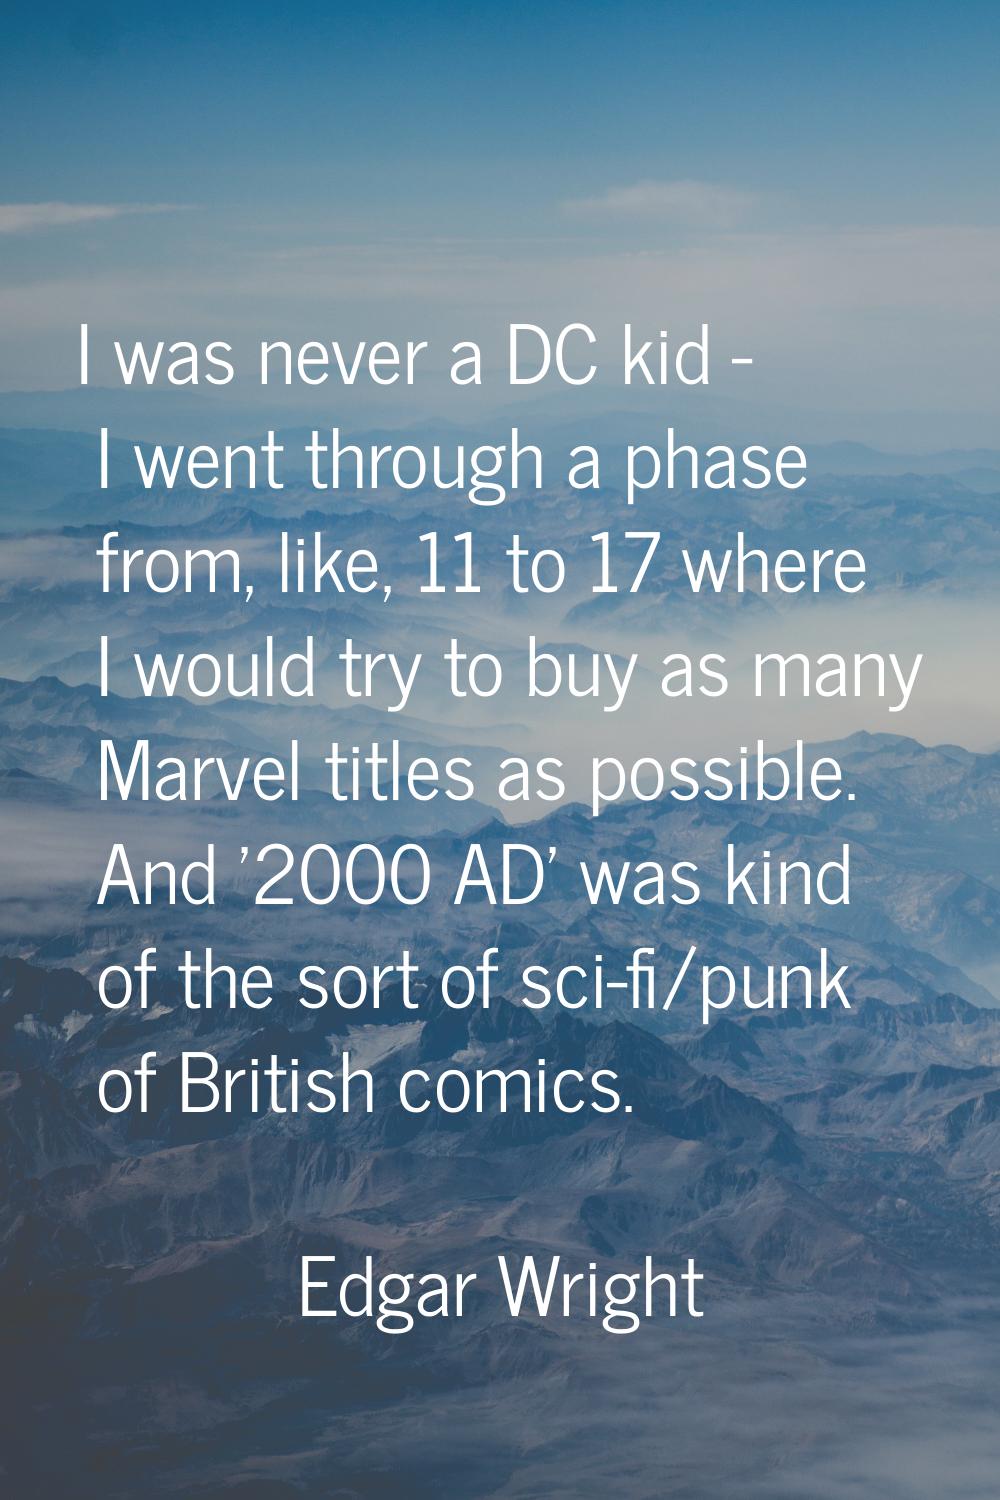 I was never a DC kid - I went through a phase from, like, 11 to 17 where I would try to buy as many